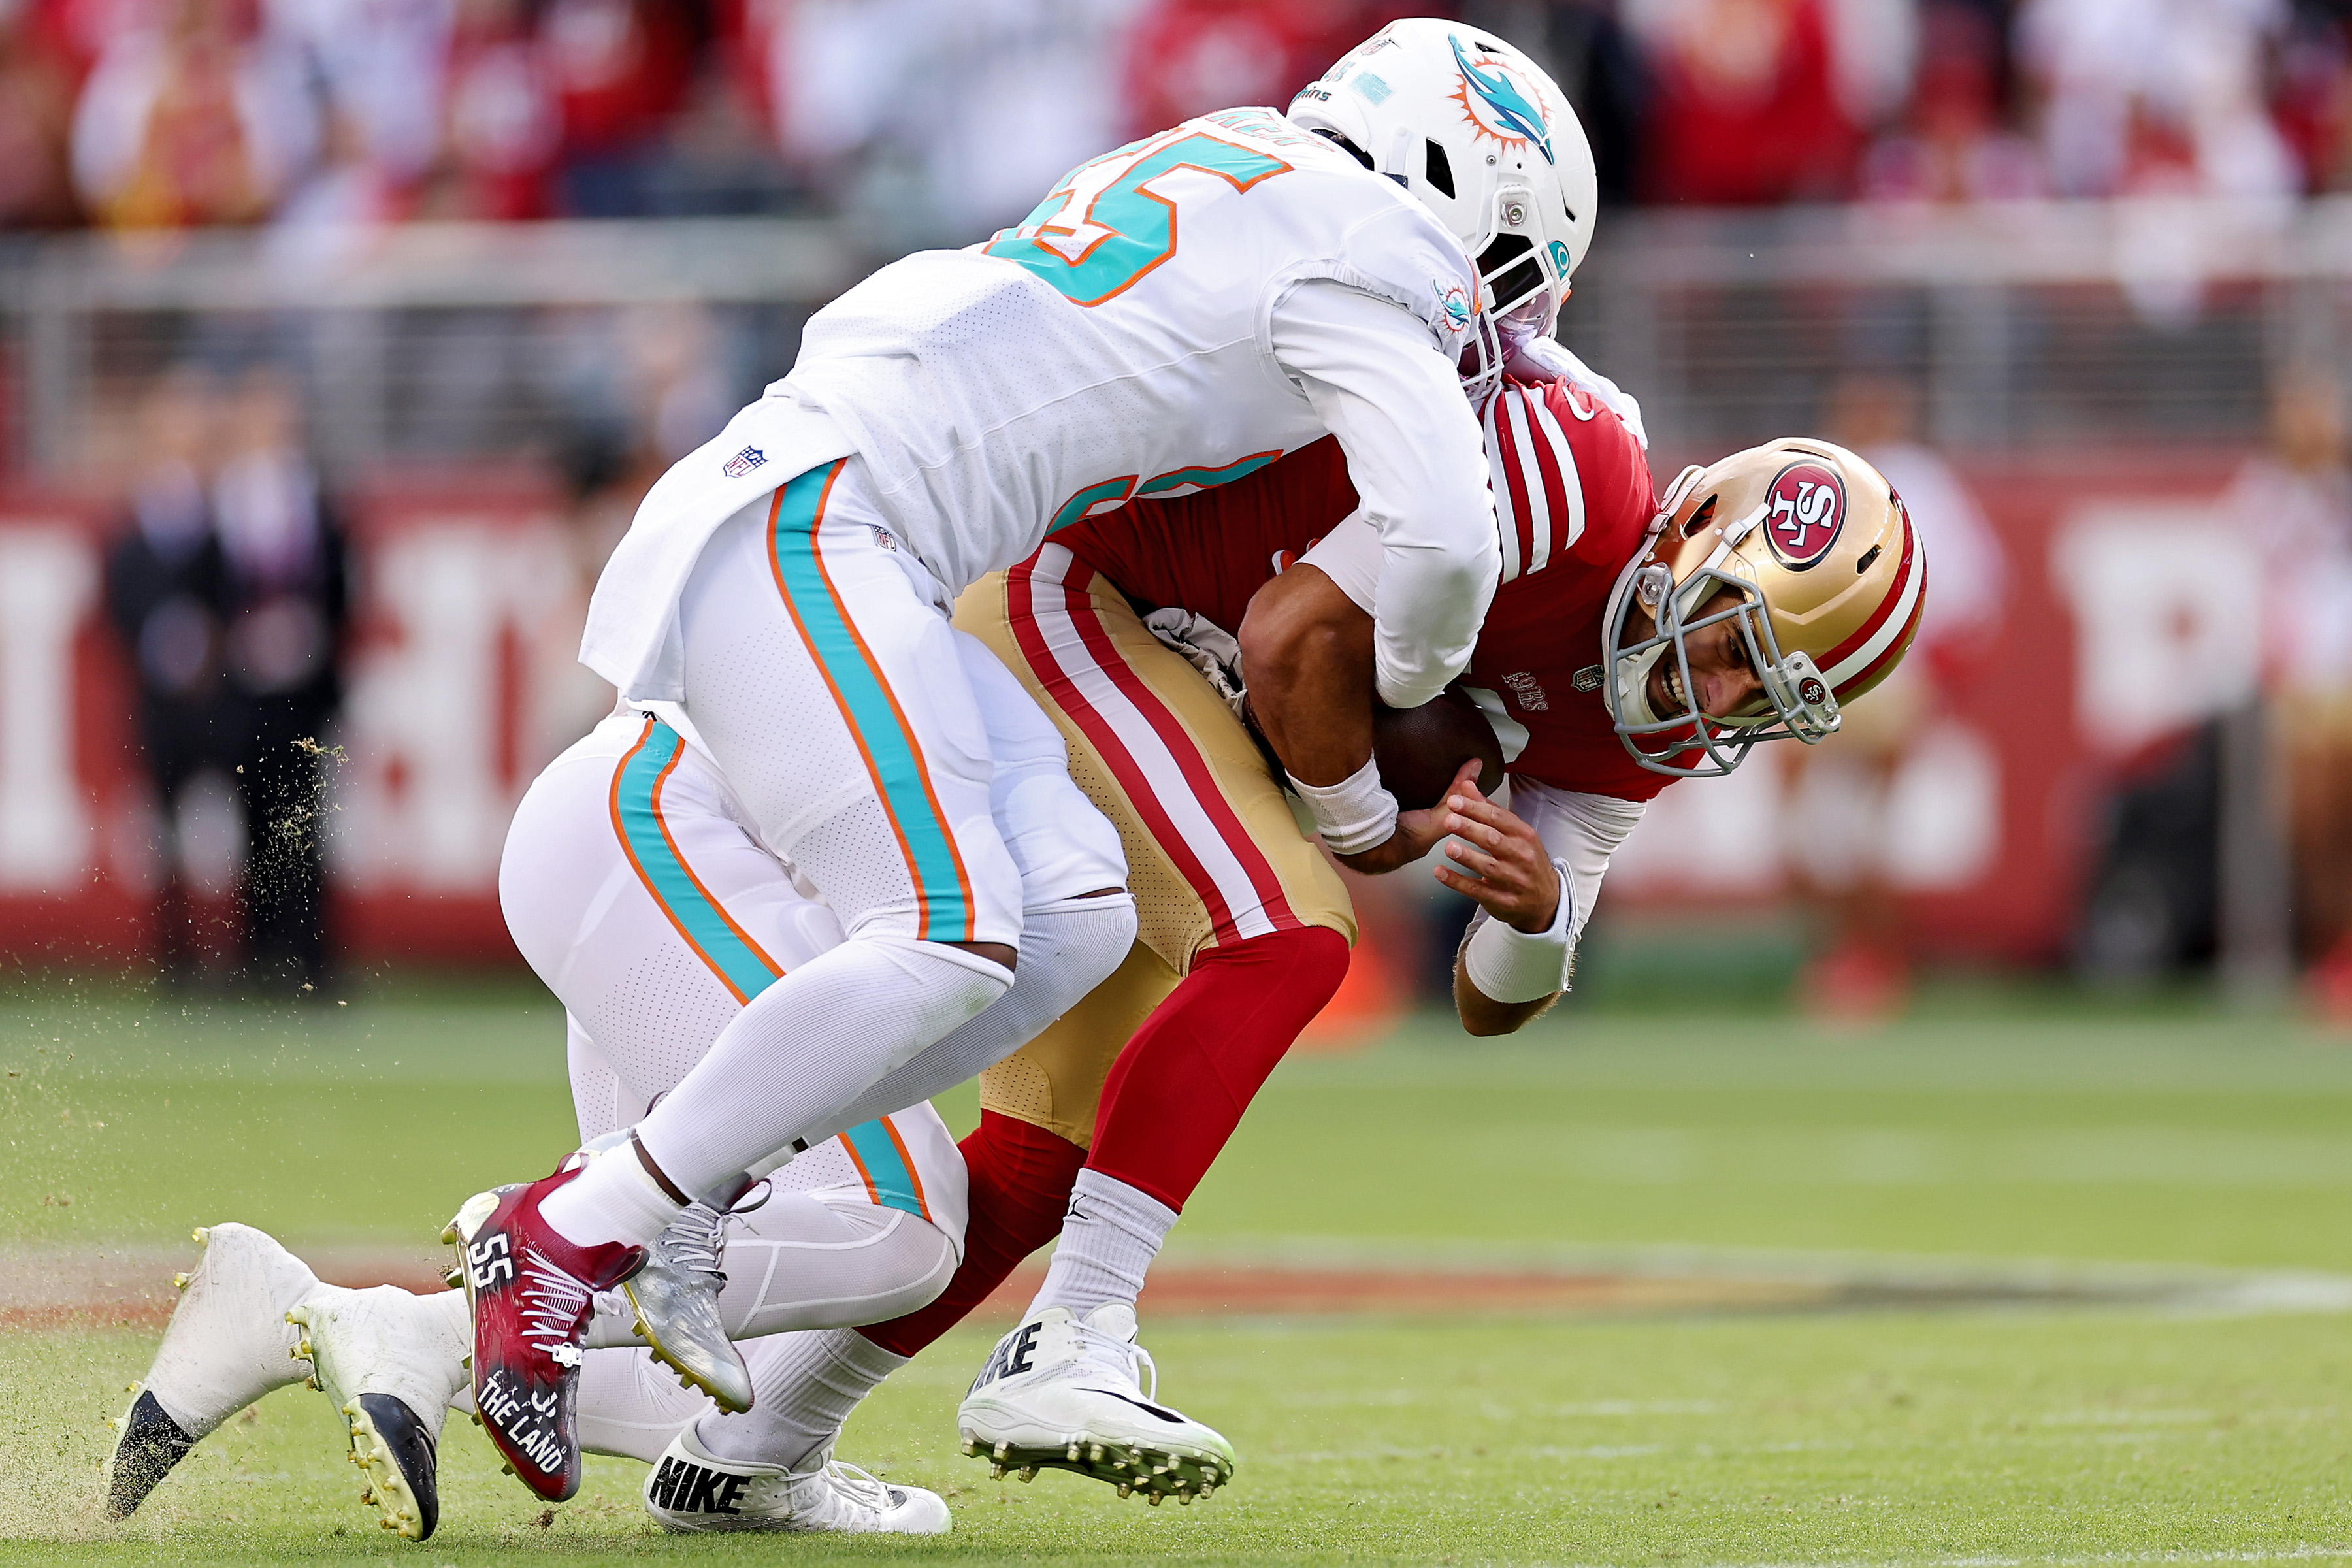 Jaelan Phillips #15 of the Miami Dolphins and Jerome Baker #55 of the Miami Dolphins sack Jimmy Garoppolo #10 of the San Francisco 49ers during the first quarter at Levi’s Stadium on December 04, 2022 in Santa Clara, California.